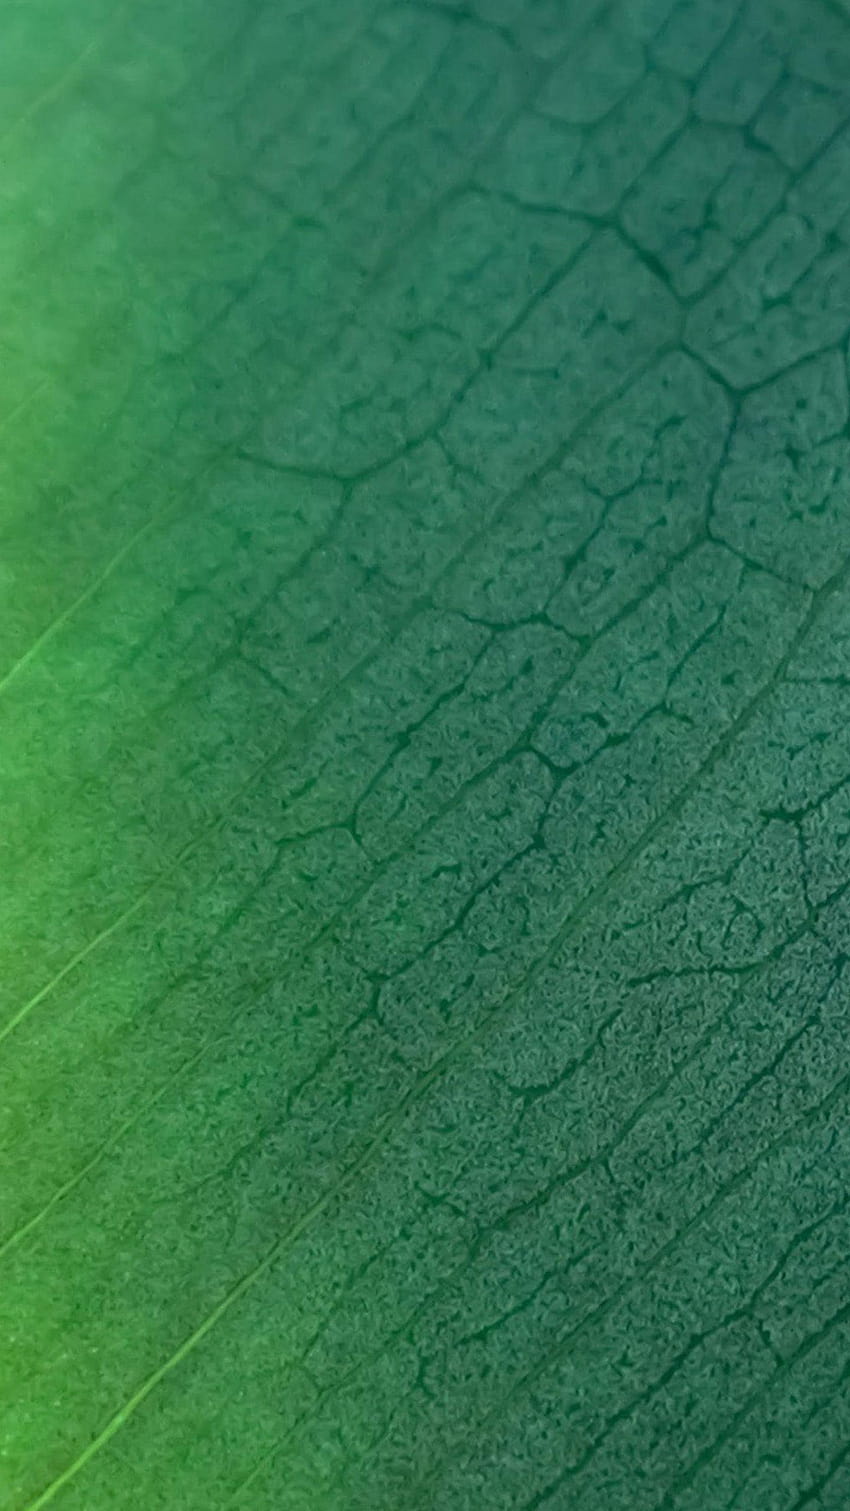 Honor Note 8 : Green leaf Android, greenleaf HD phone wallpaper